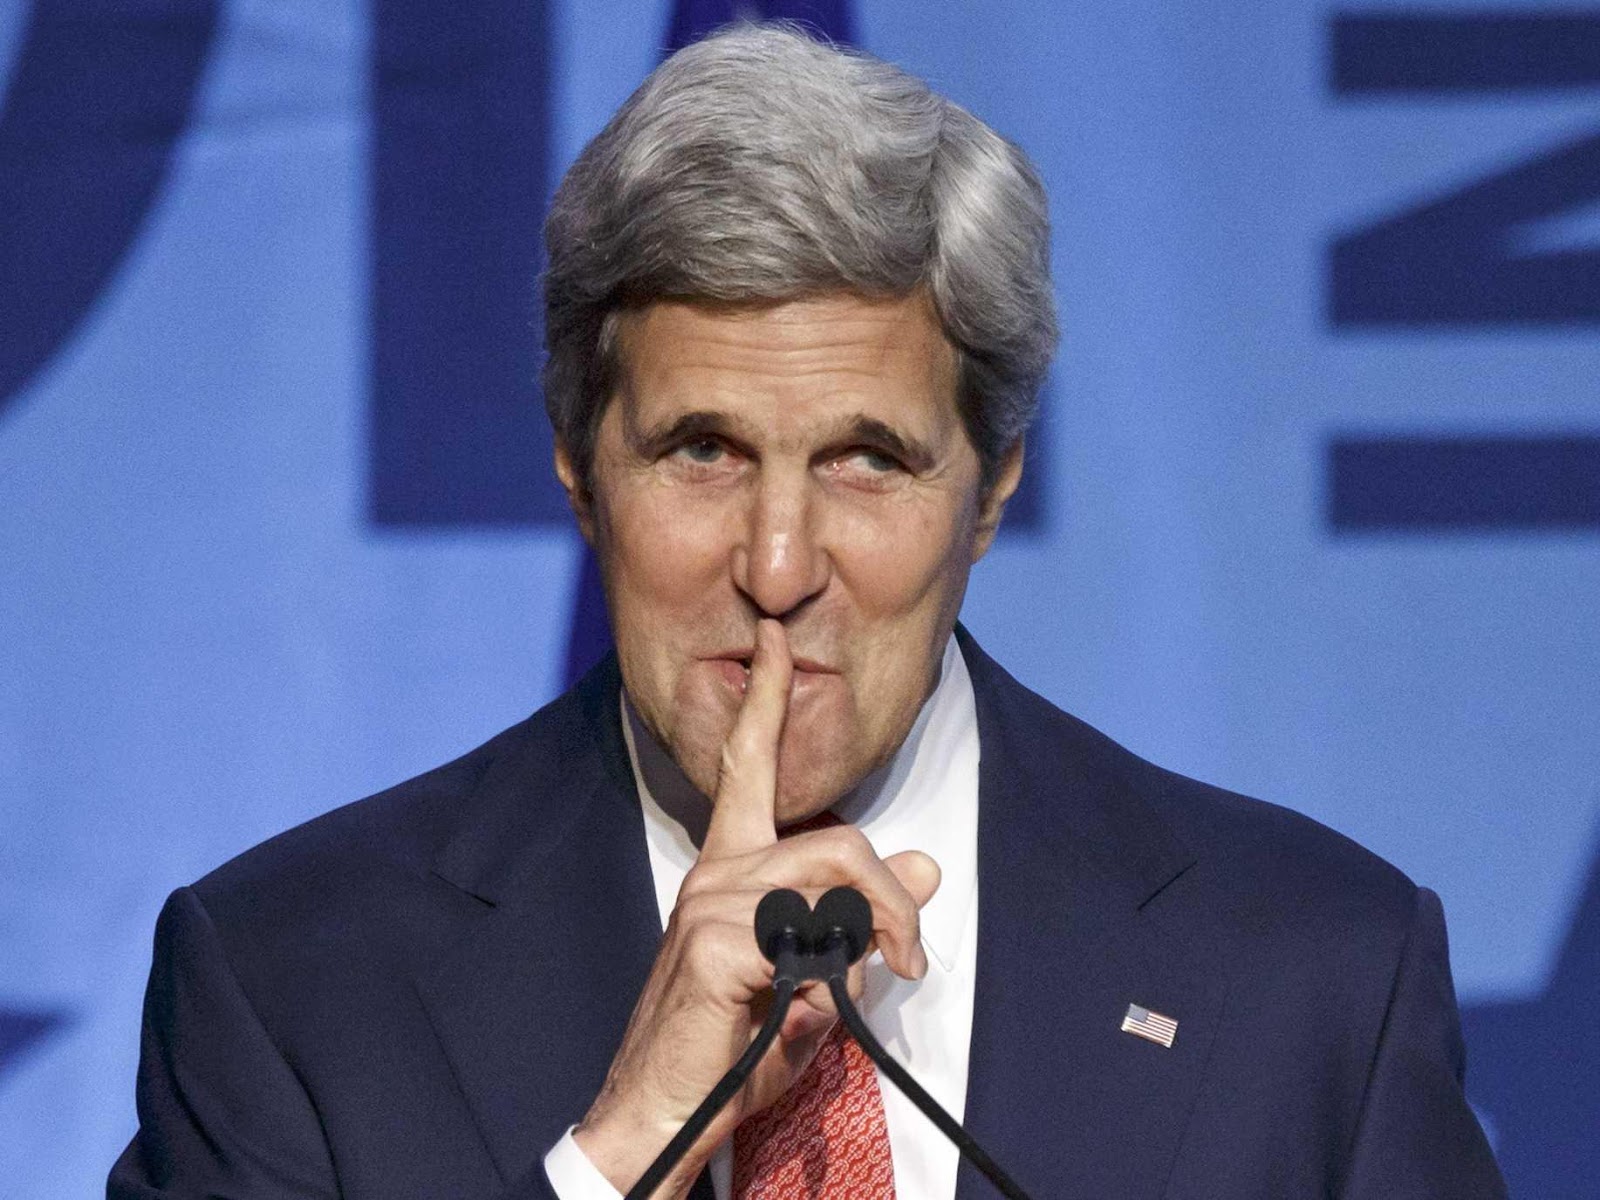 http://static1.businessinsider.com/image/535ea70869bedd84679c9161/john-kerry-is-getting-slammed-for-using-the-a-word-with-israel.jpg